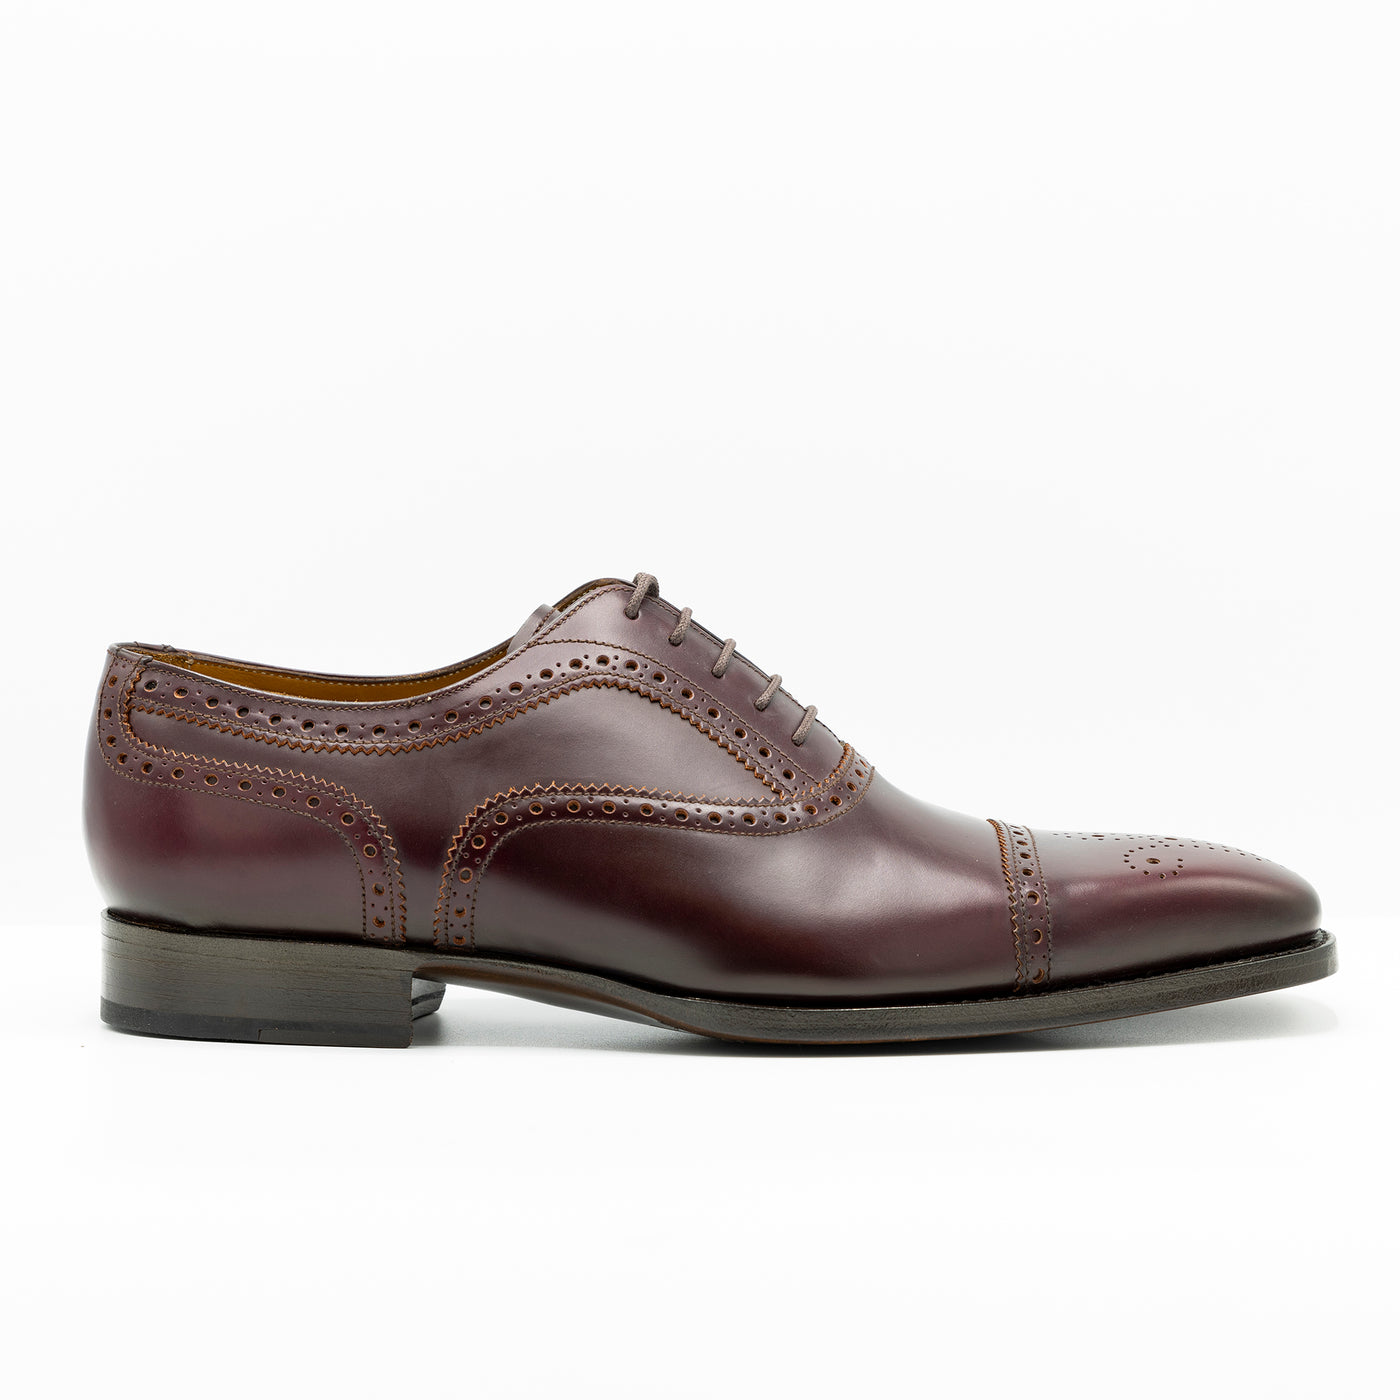 Oxford leather shoes in ruby leather with goodyear welted leather soles and waxed shoe laces. 